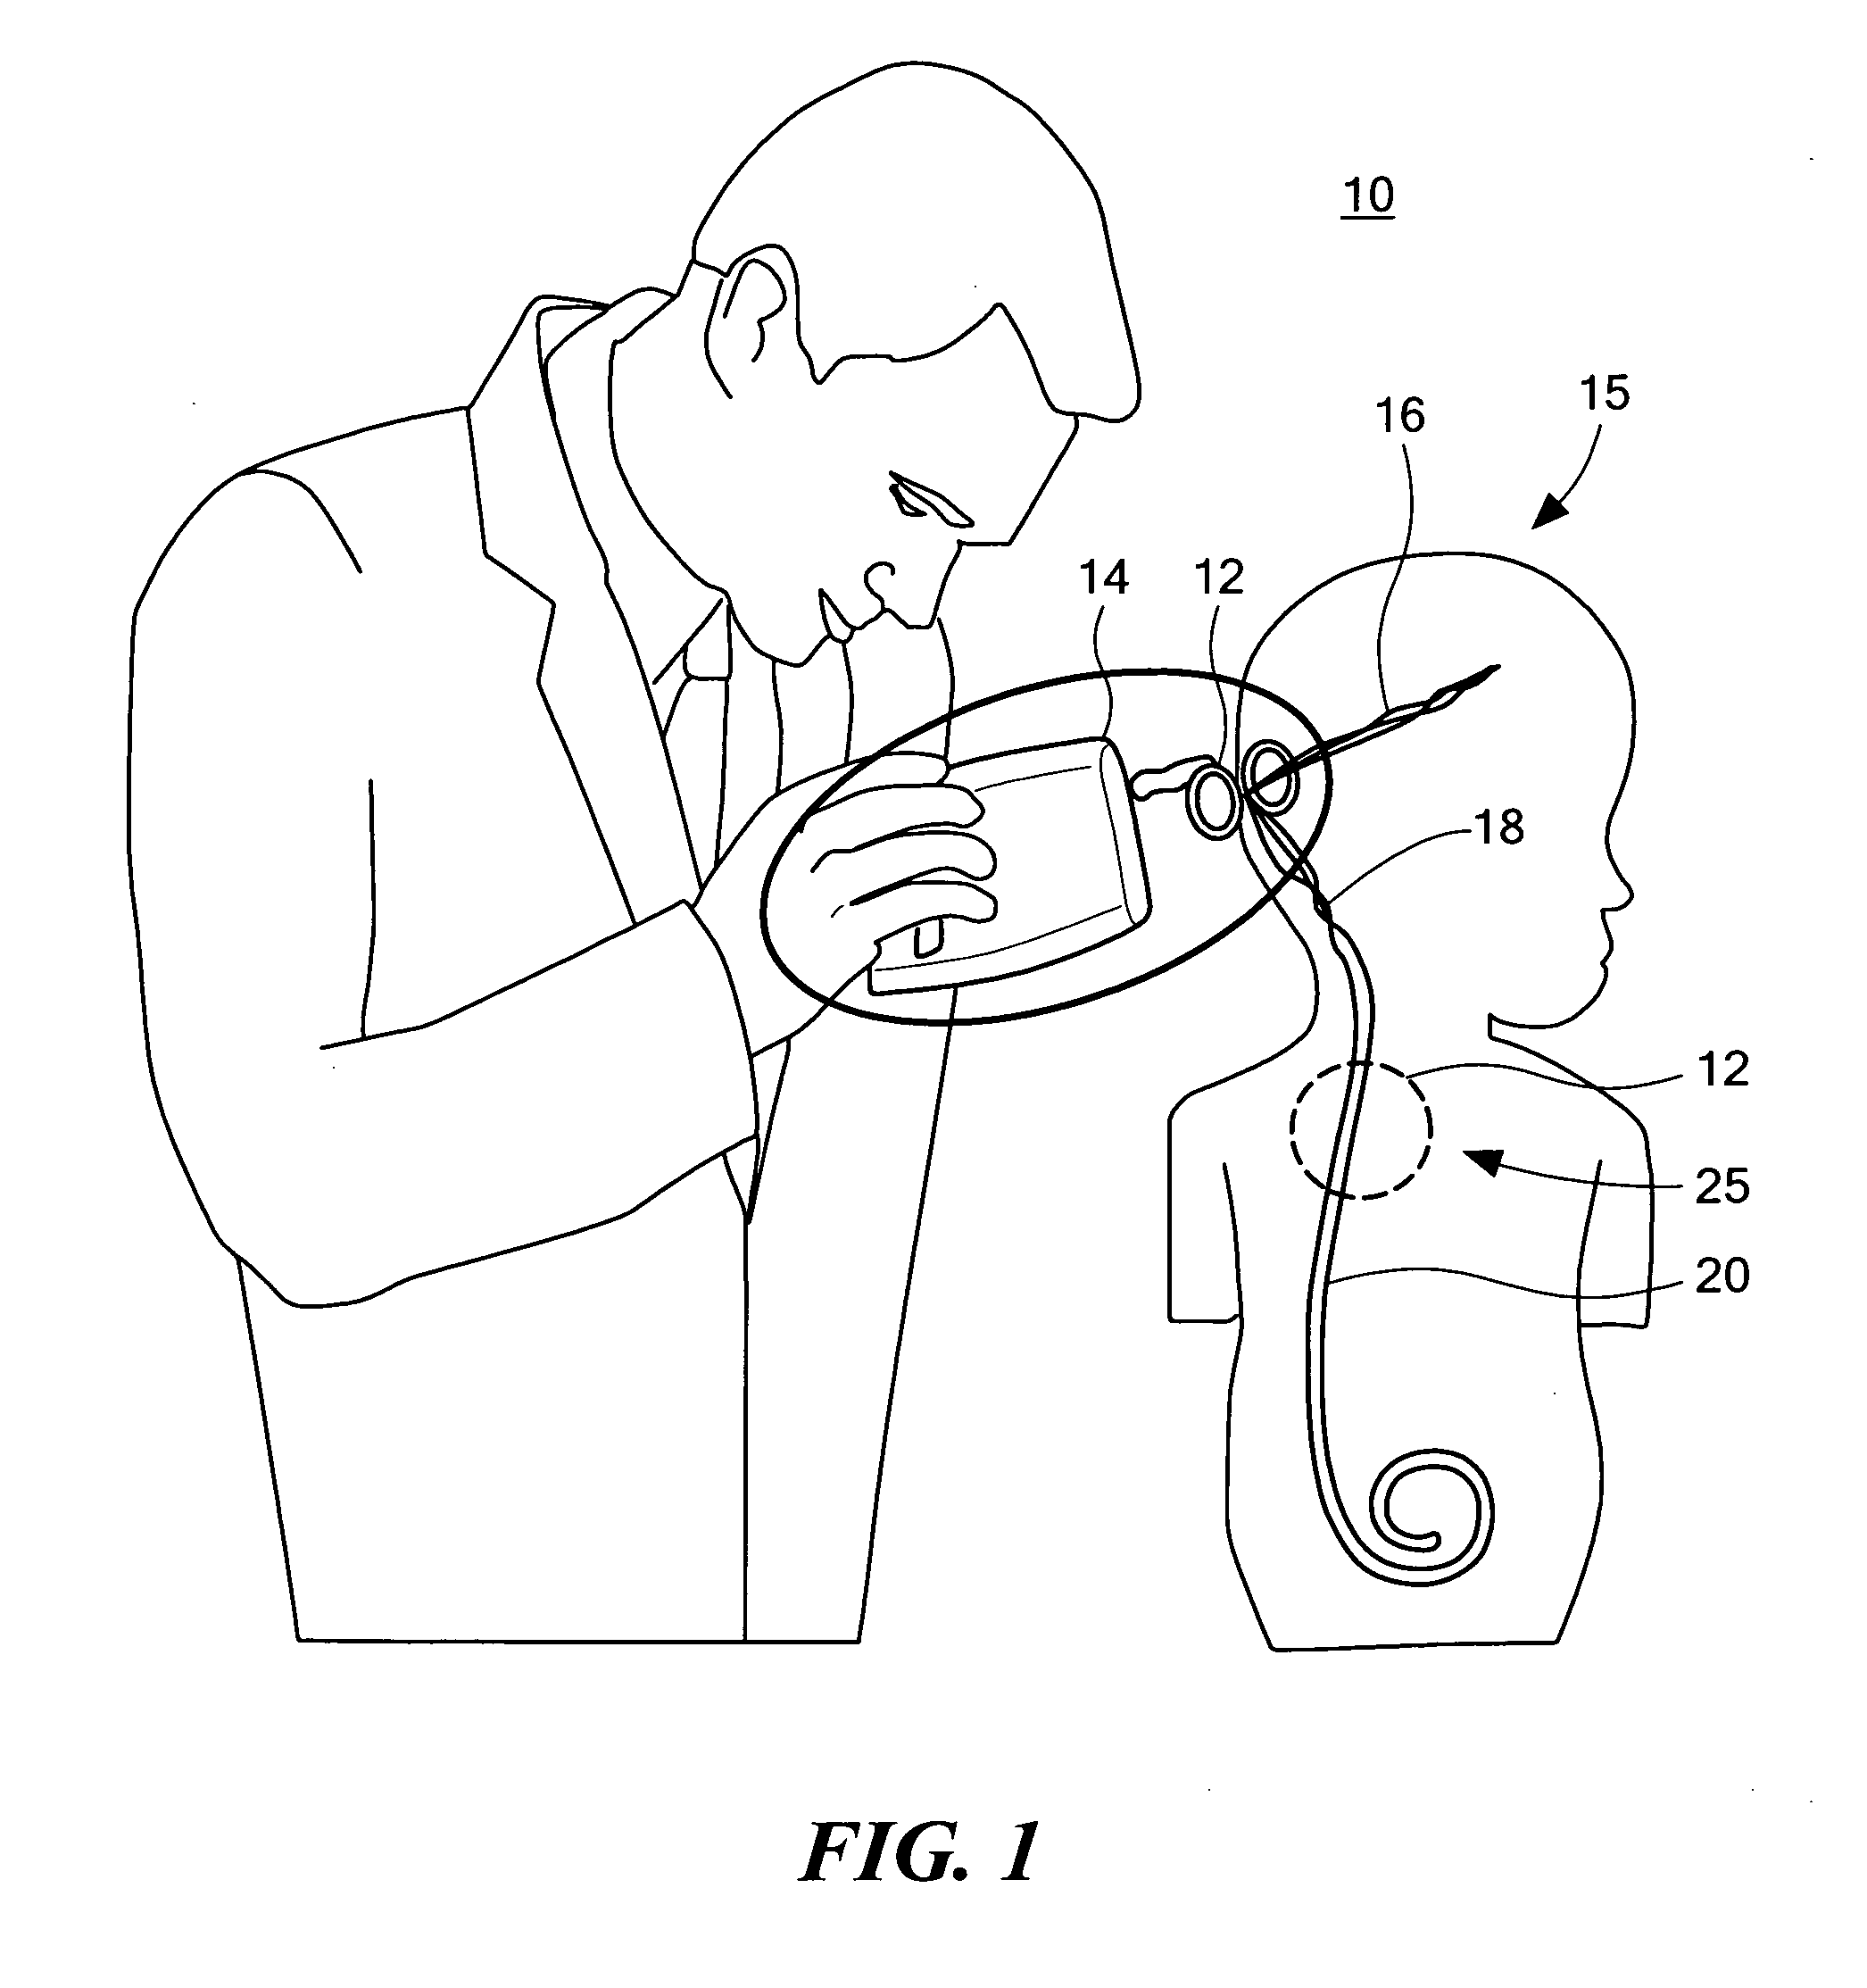 Flow rate sensor system and method for non-invasively measuring the flow rate of a bodily fluid